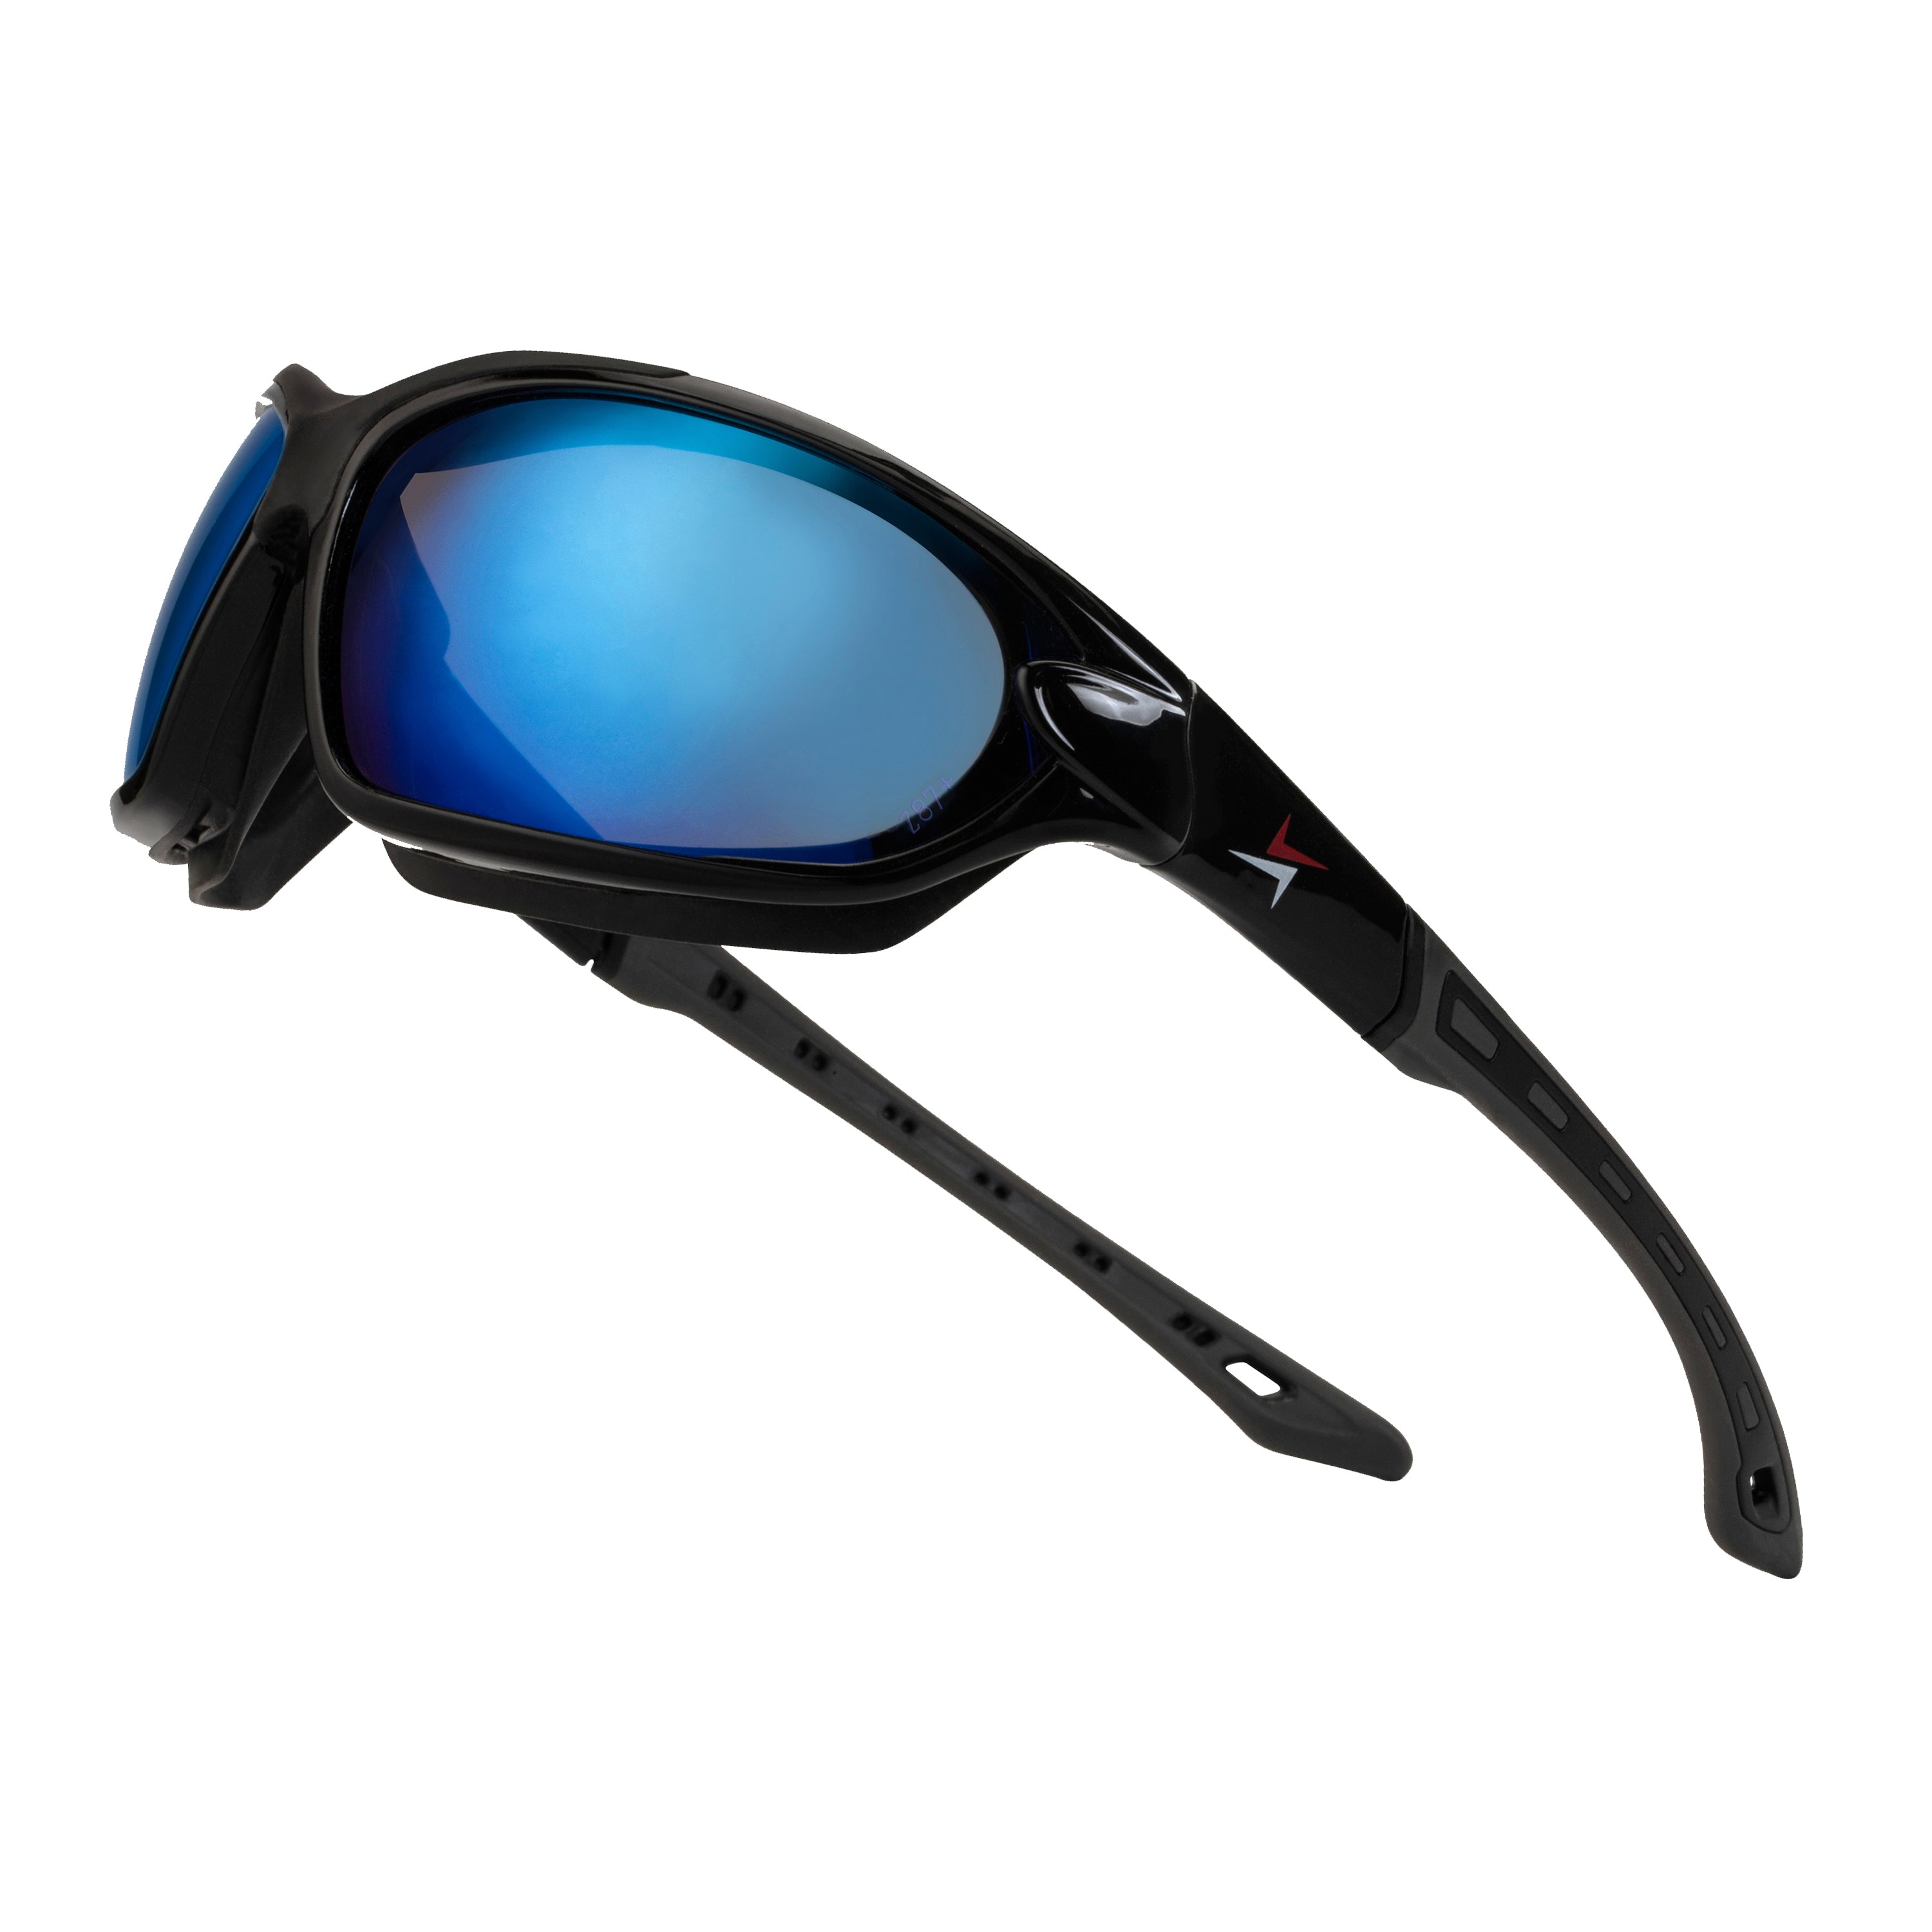 Blue Mirror Lens Sport Safety Sunglasses with Swappable Strap and Gasketed Goggle Padding.